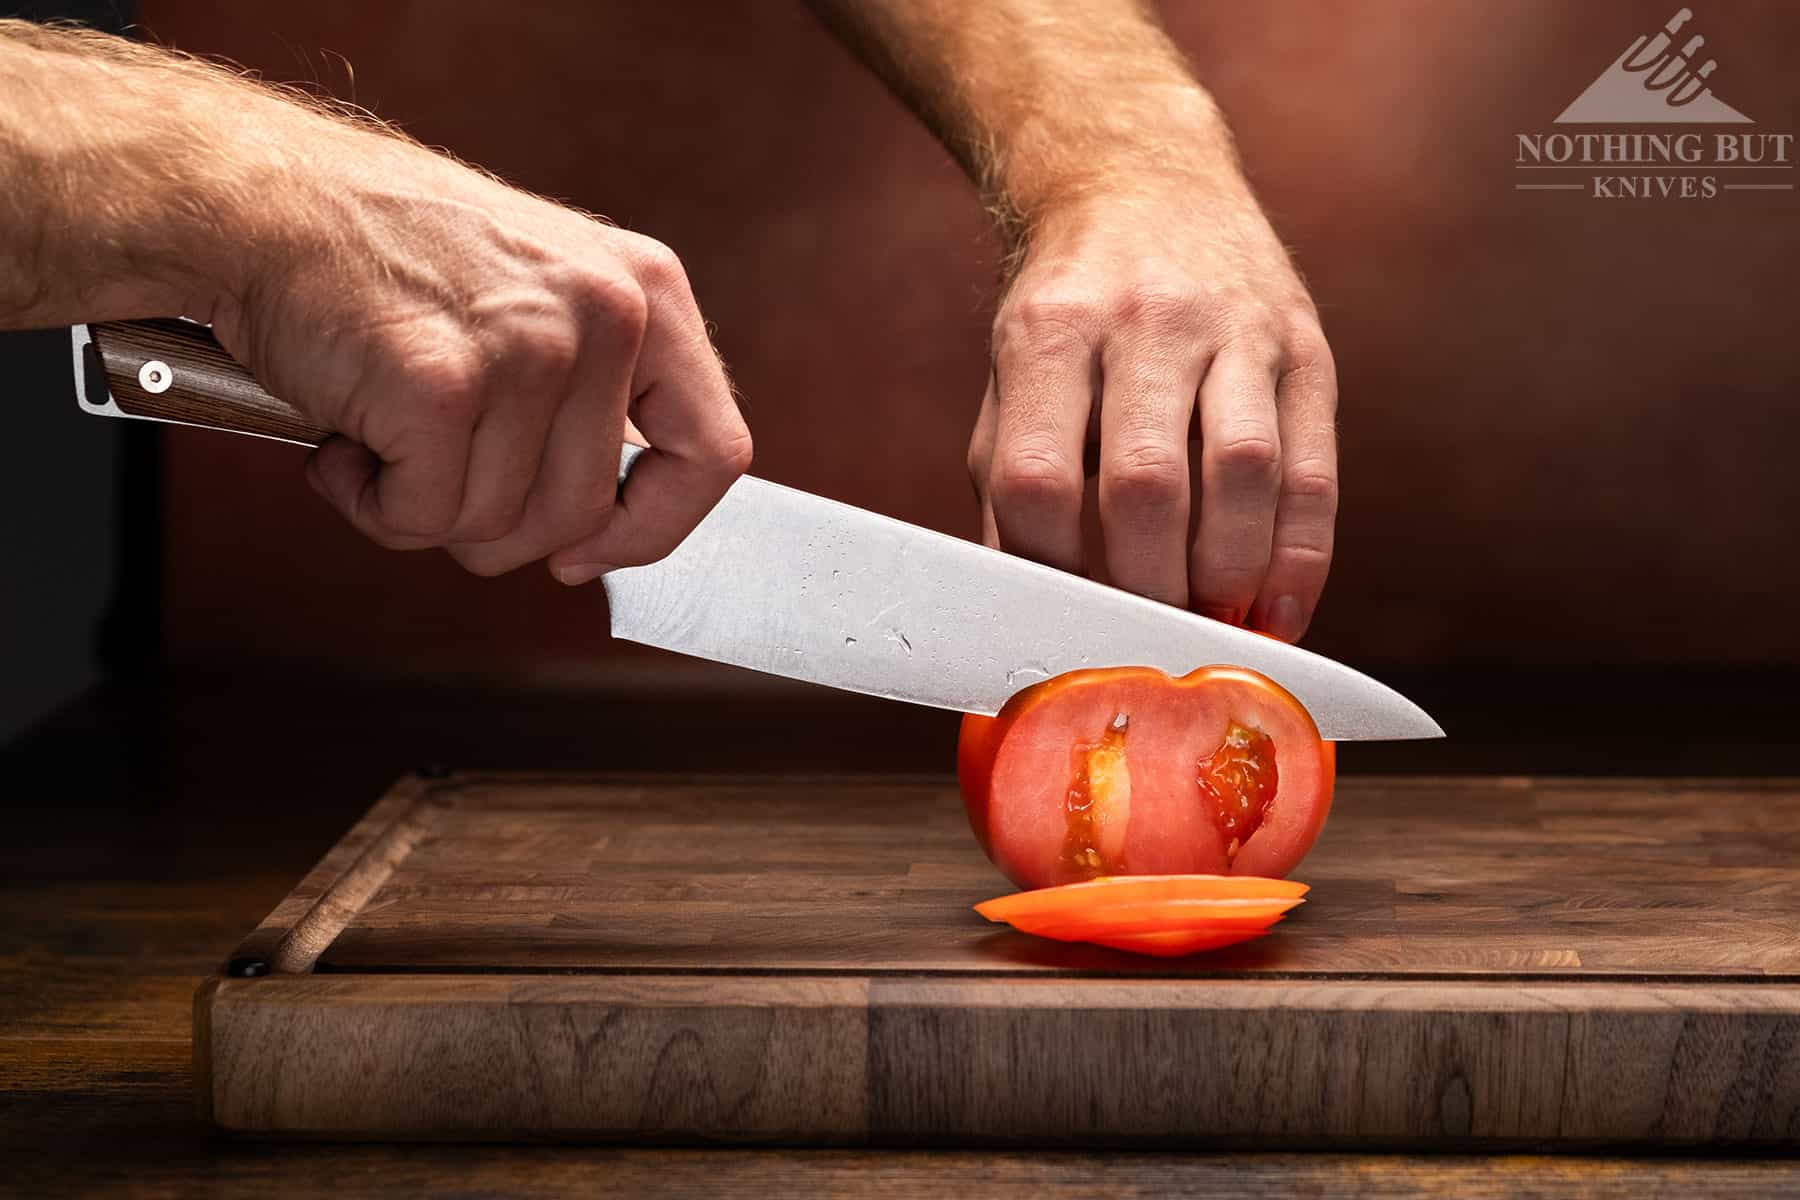 This knife has a polished edge, which can sometimes have trouble with hard, smooth surfaces of food, but it’s plenty sharp.